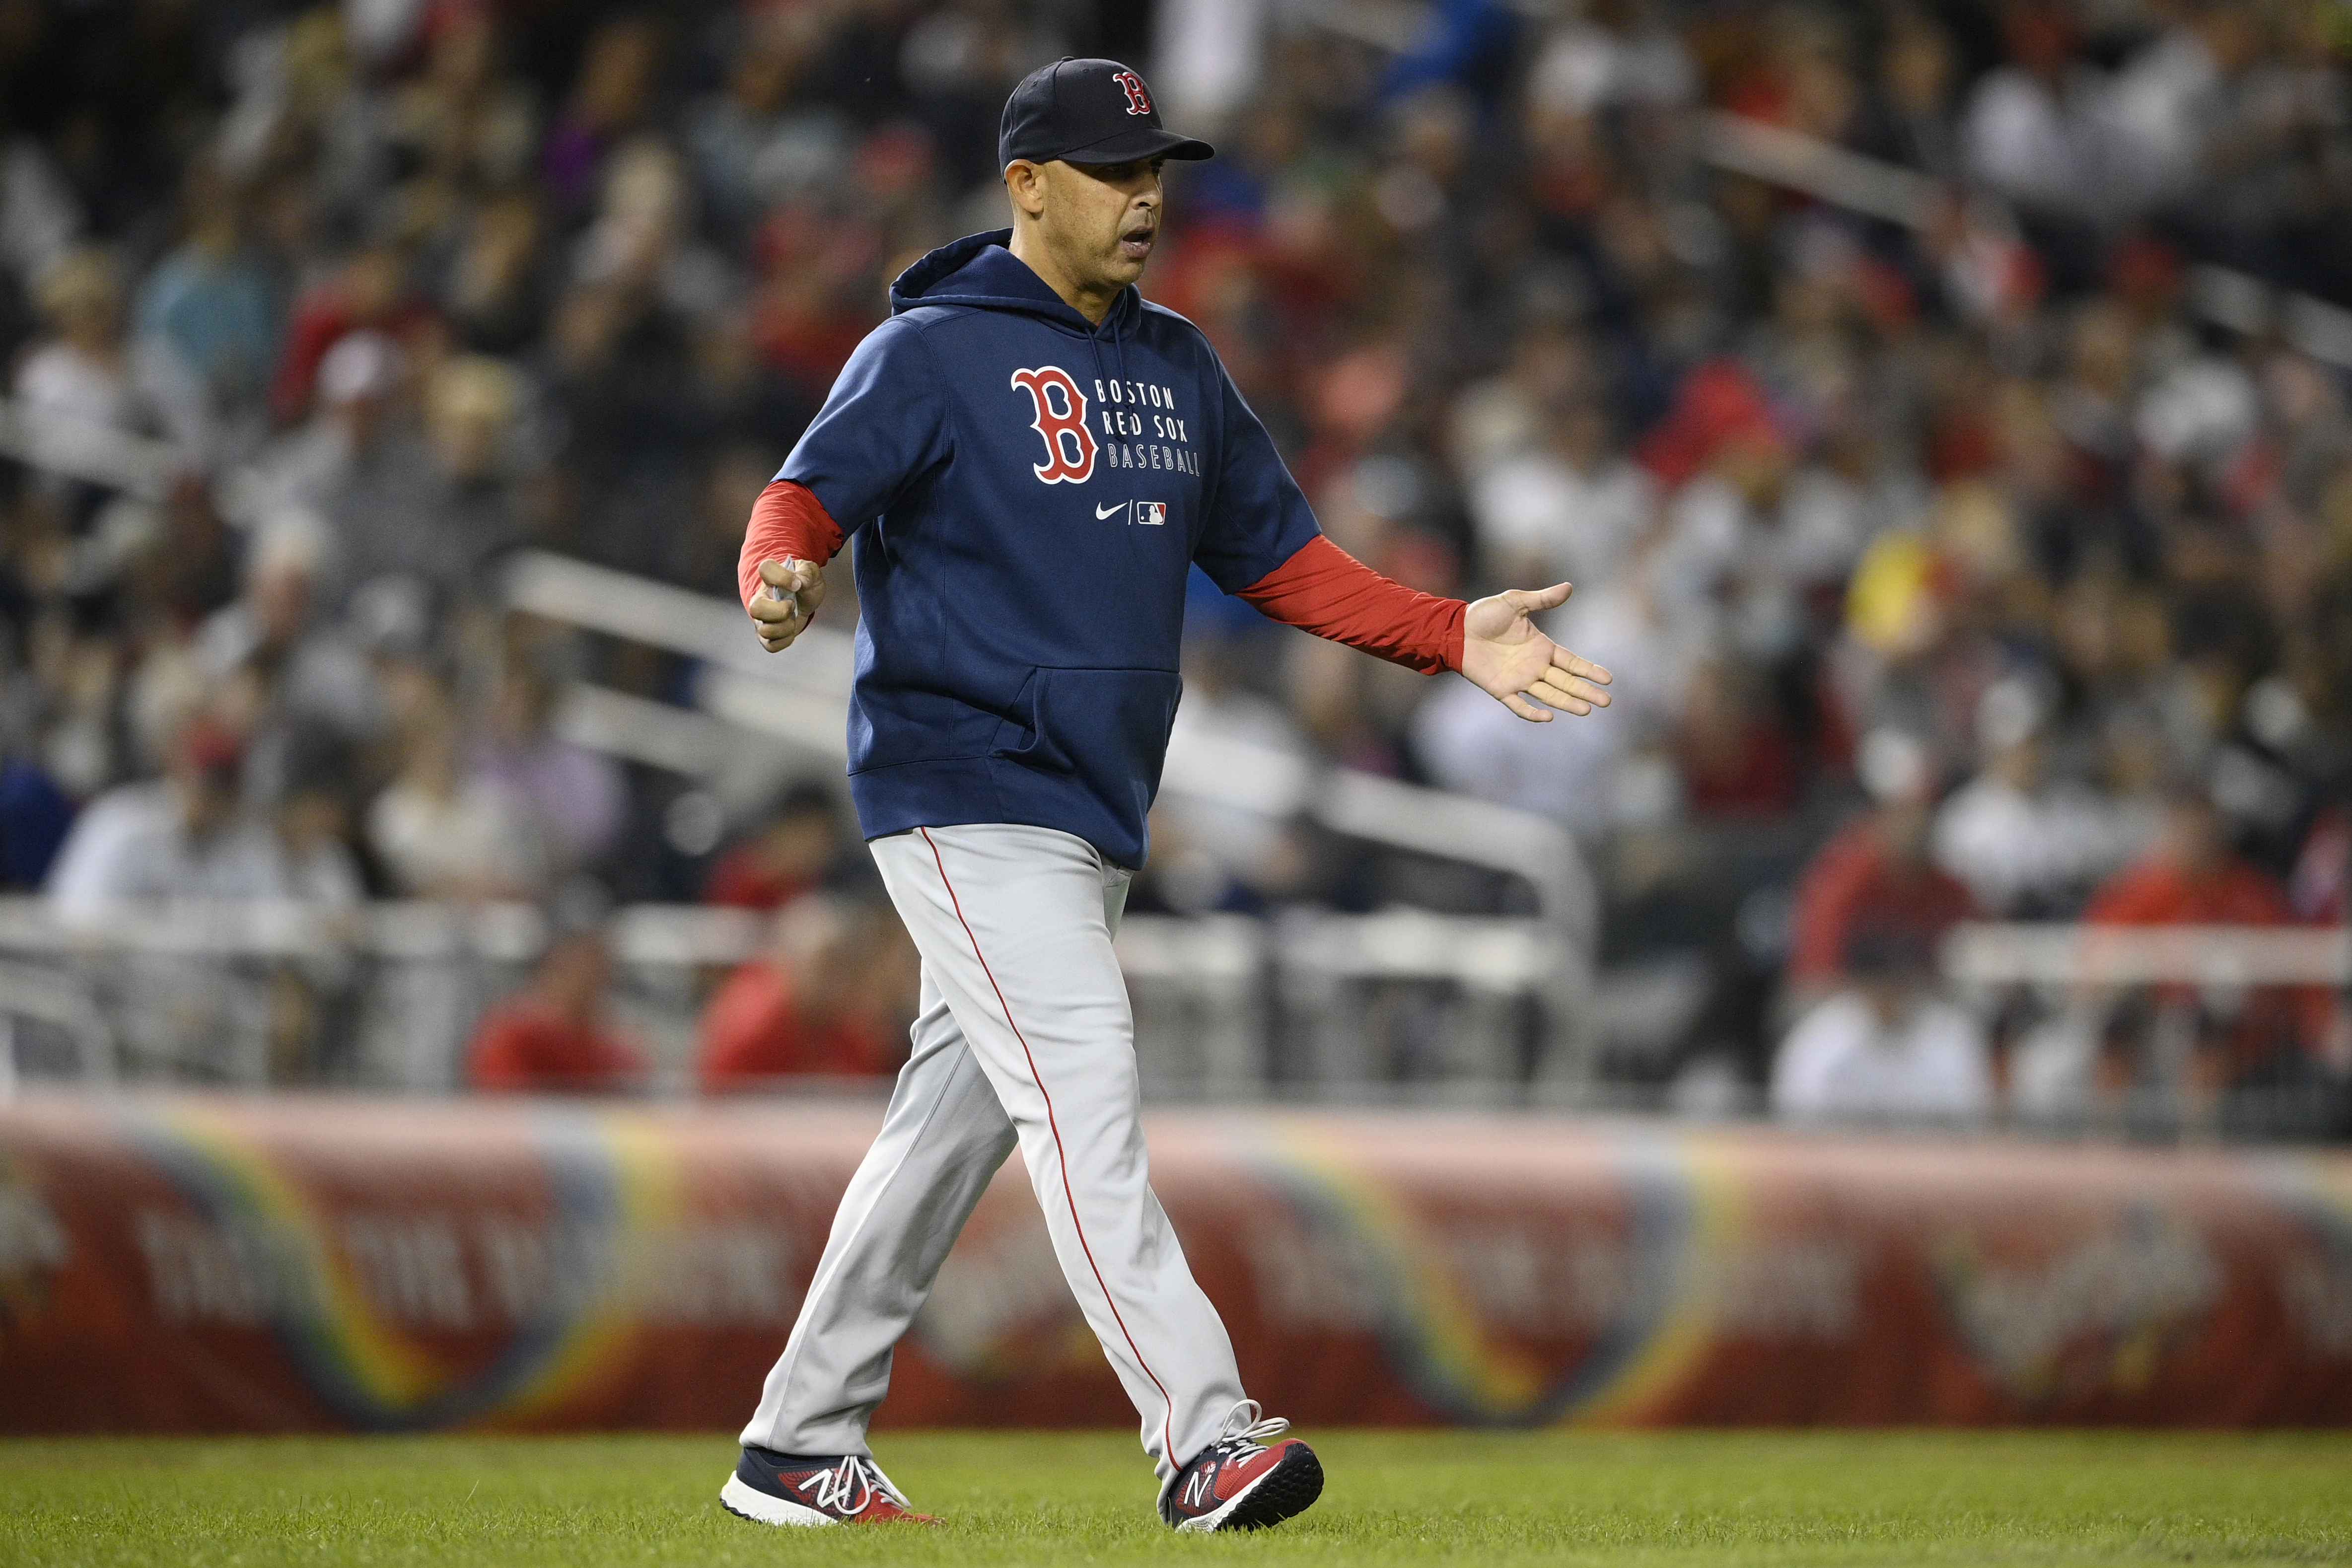 Red Sox: Boston's handling of Alex Cora could drastically affect 2021